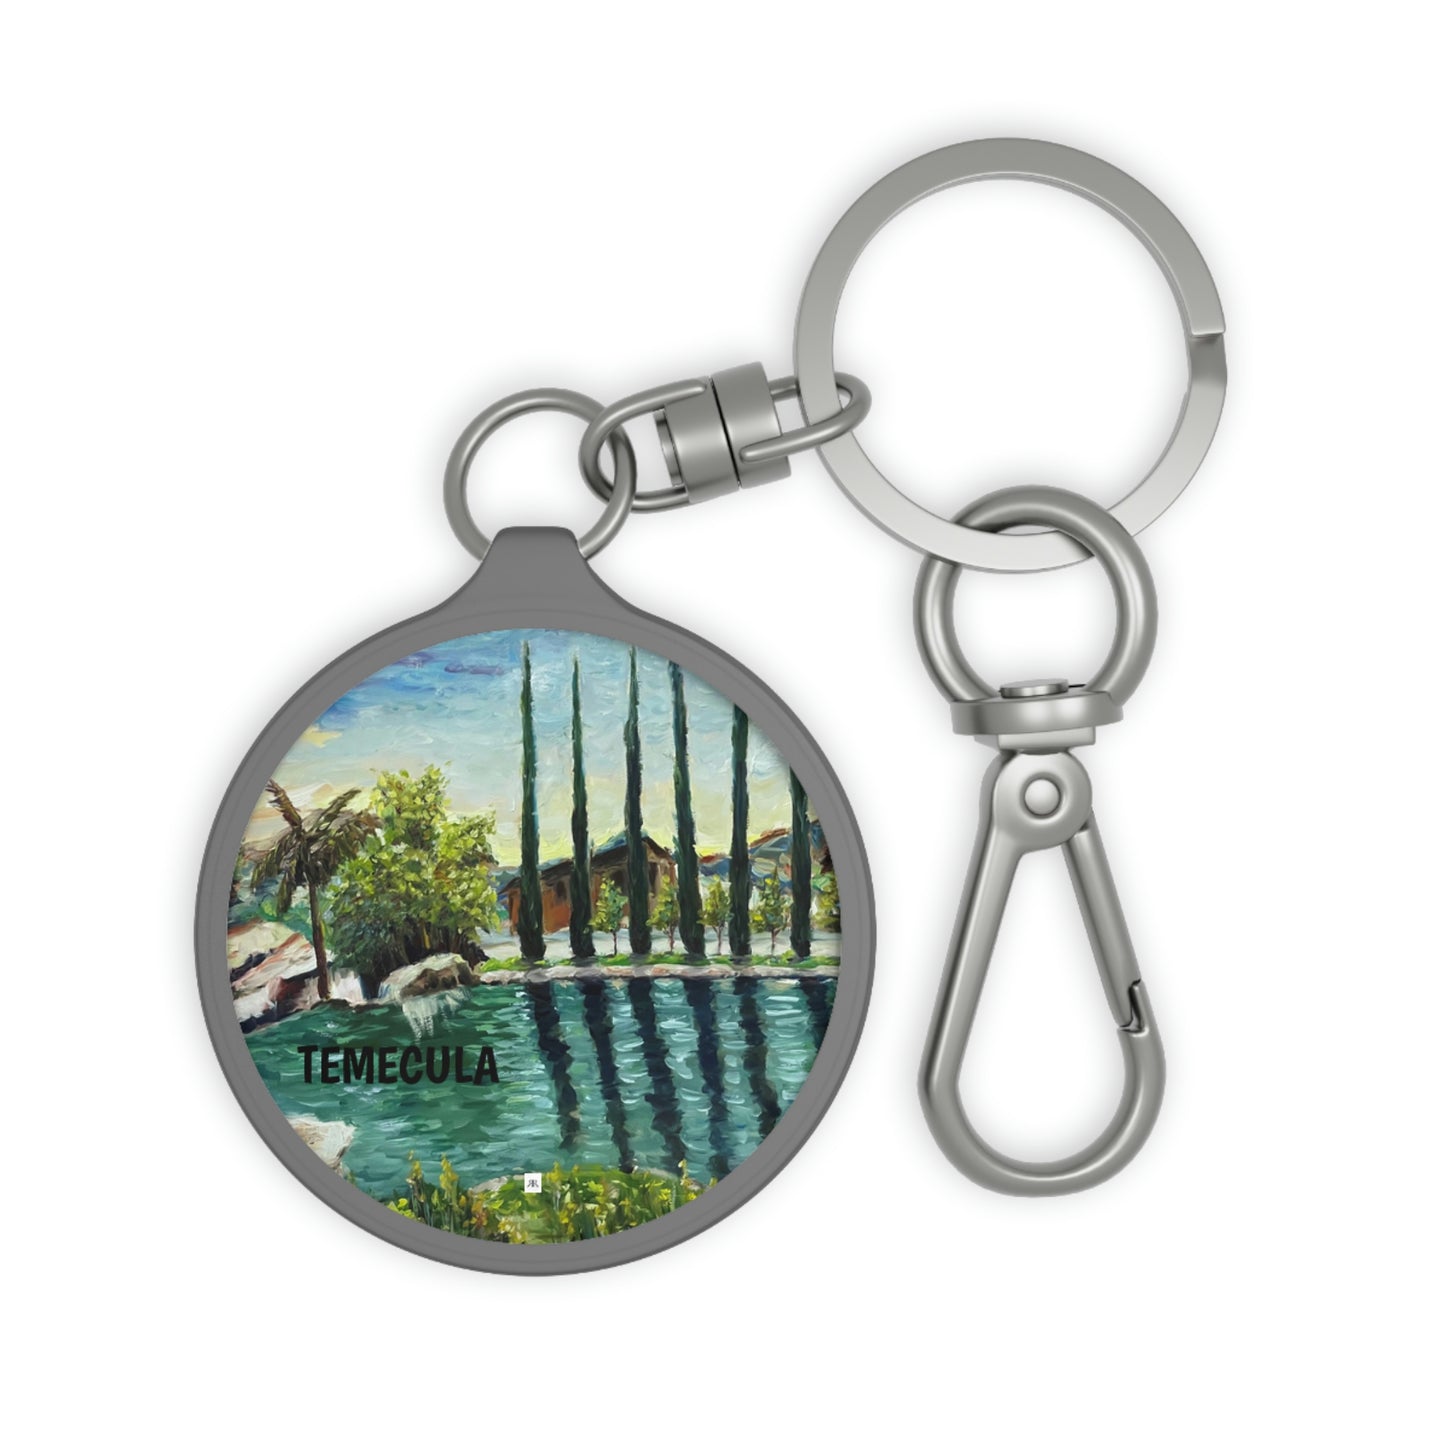 Temecula Keyring featuring "The Pond at Gershon Bachus Vintners" Landscape Painting by Roxy Rich